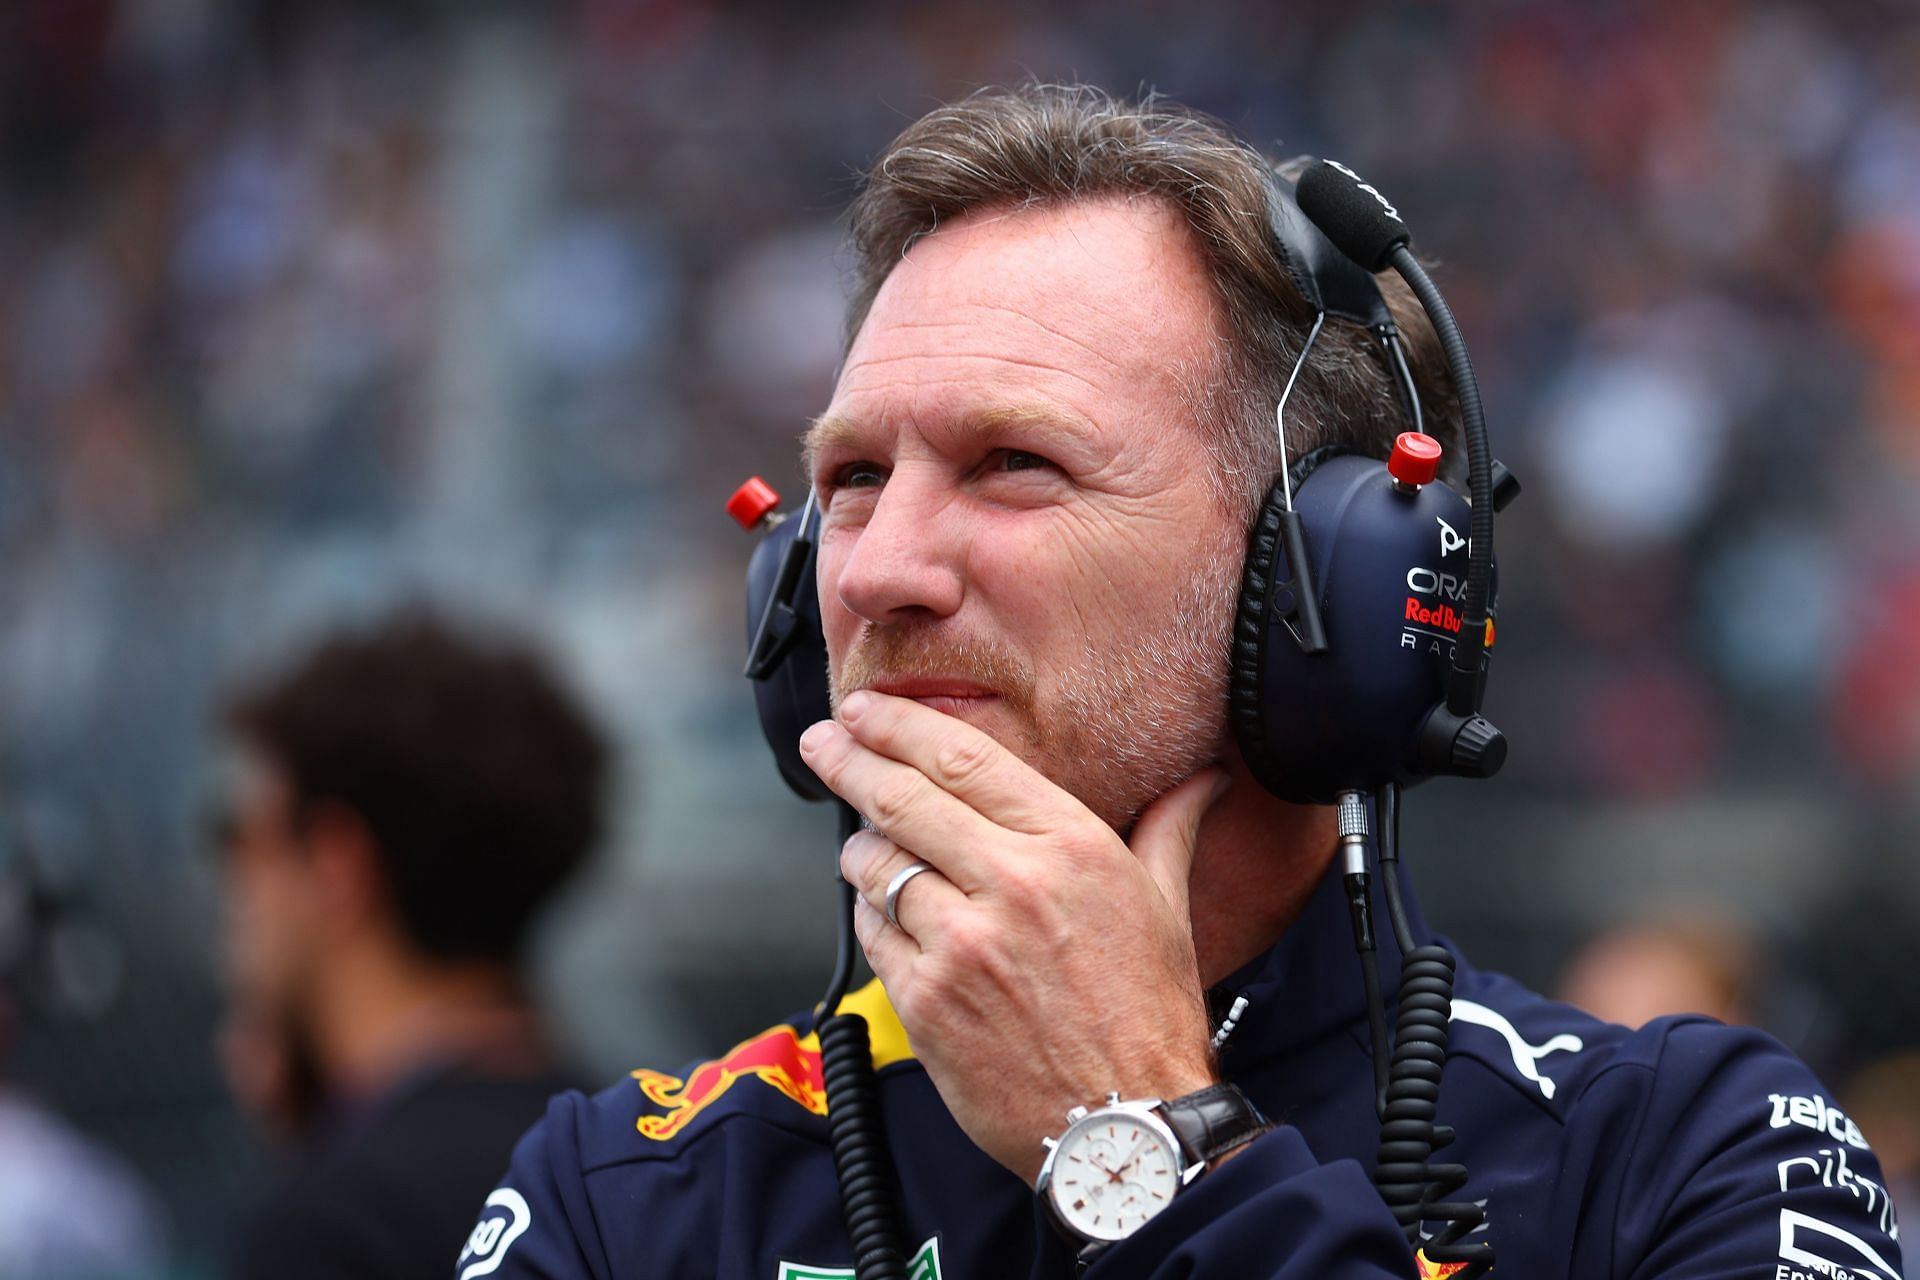 Red Bull team principal Christian Horner during the 2022 F1 British GP. (Photo by Bryn Lennon/Getty Images)